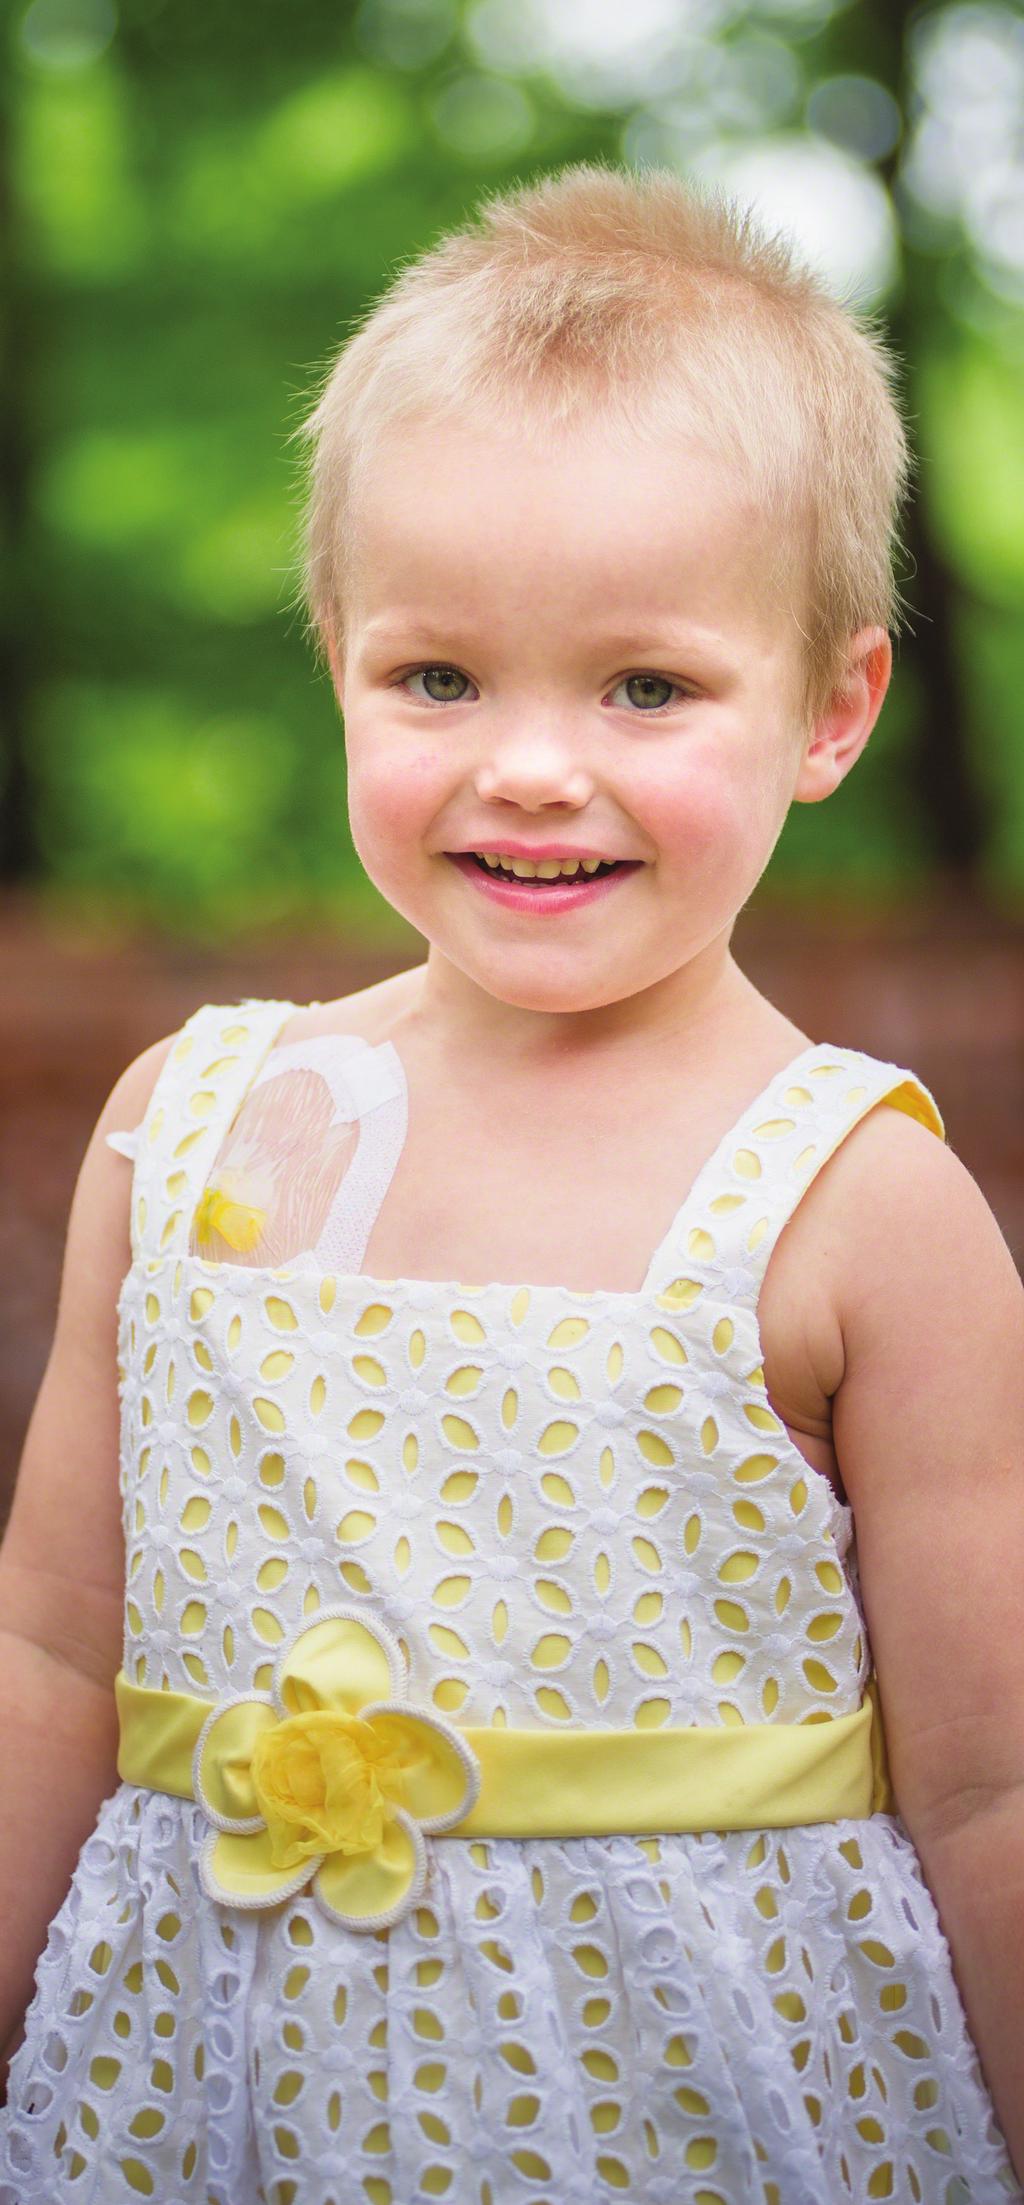 Meet Mabry age 5, acute lymphoblastic leukemia Five-year-old Mabry has a sunny smile and a chipper voice.